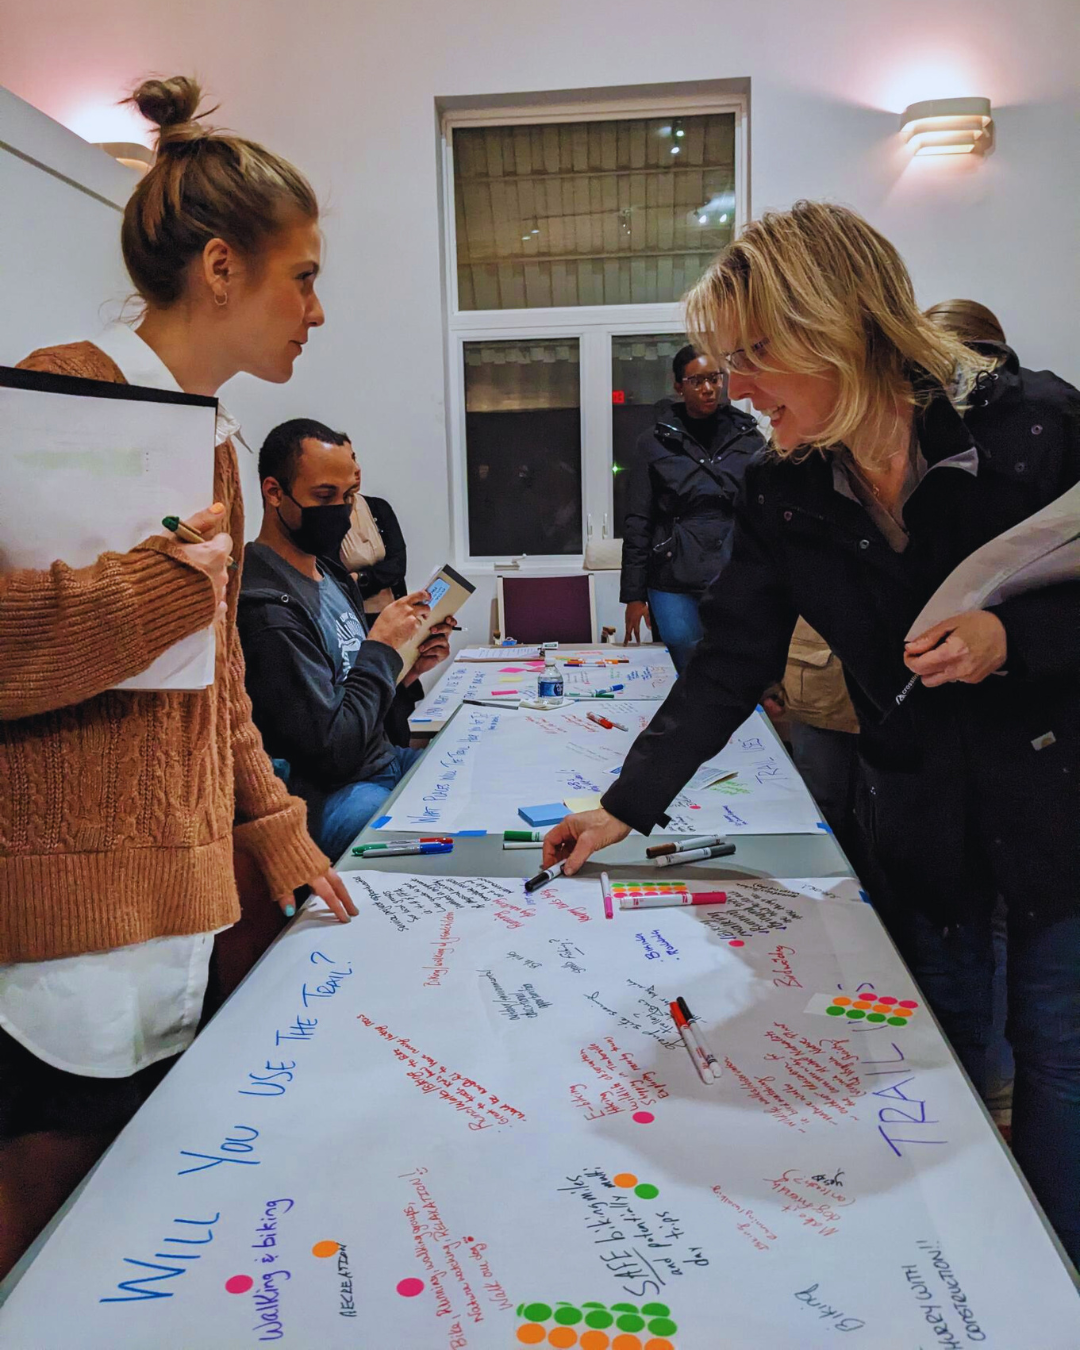 Two women lean over a table covered in paper written with comments in multi-colored marker and dots.